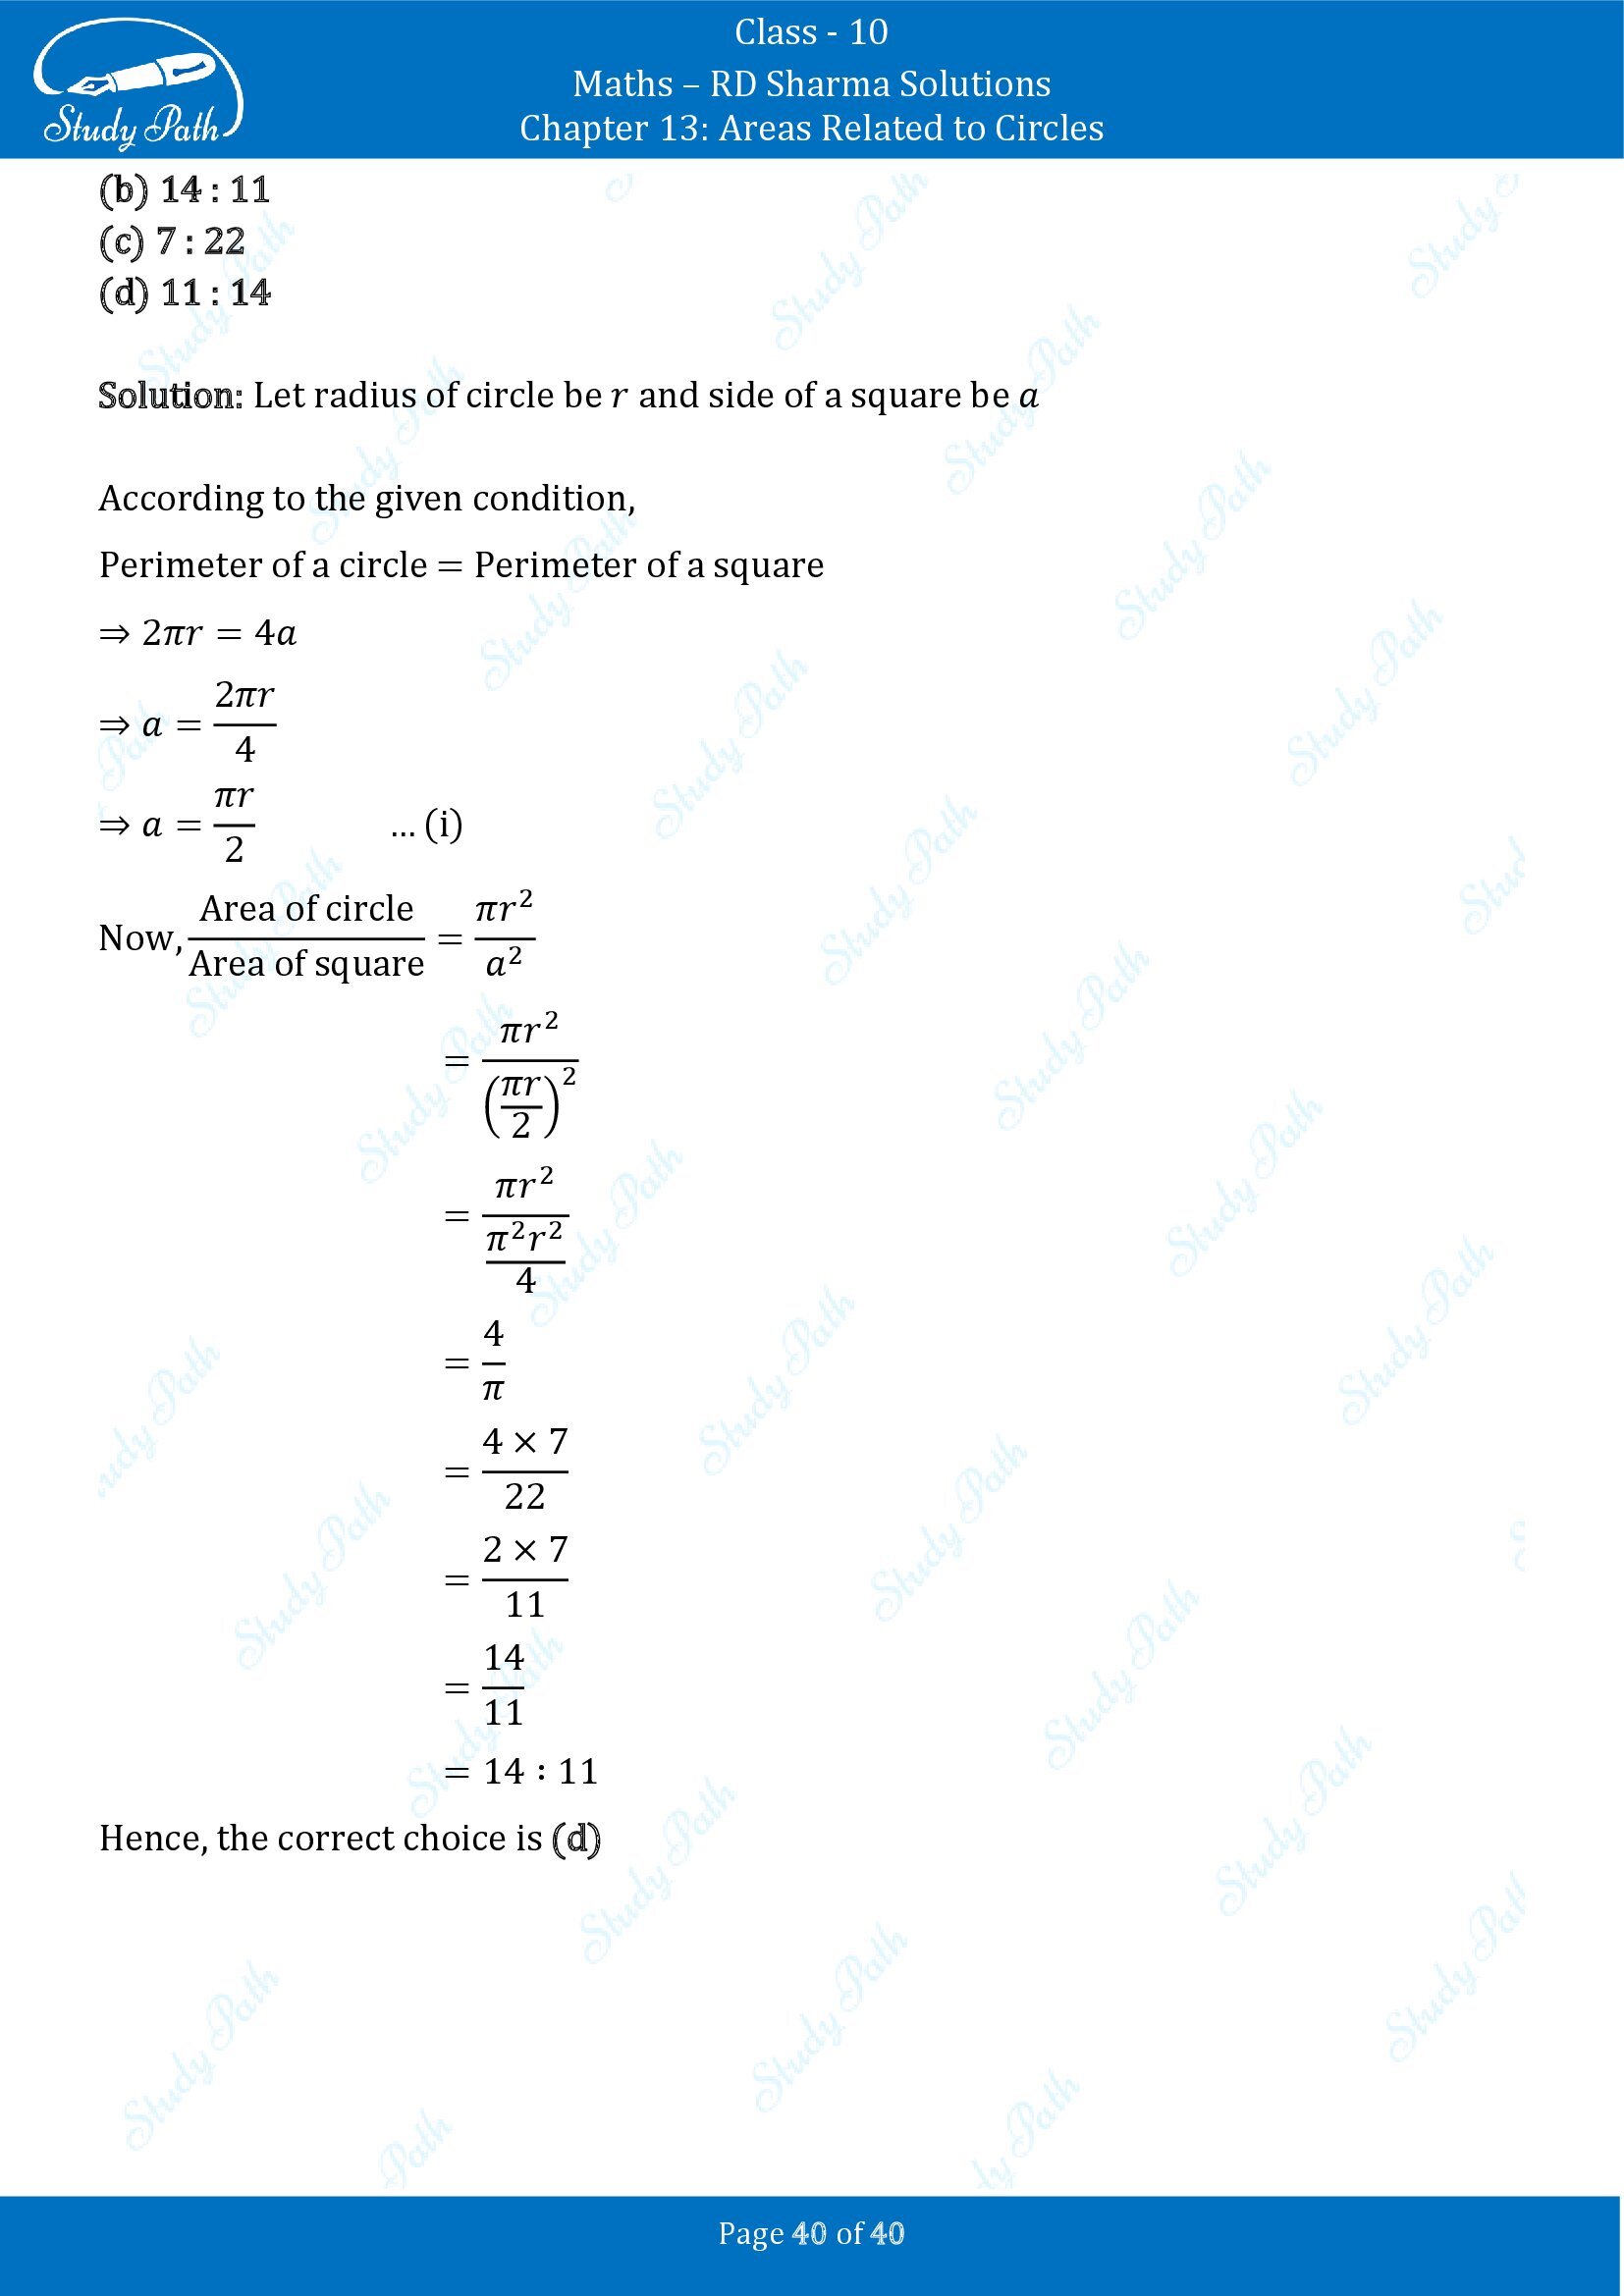 RD Sharma Solutions Class 10 Chapter 13 Areas Related to Circles Multiple Choice Question MCQs 00040